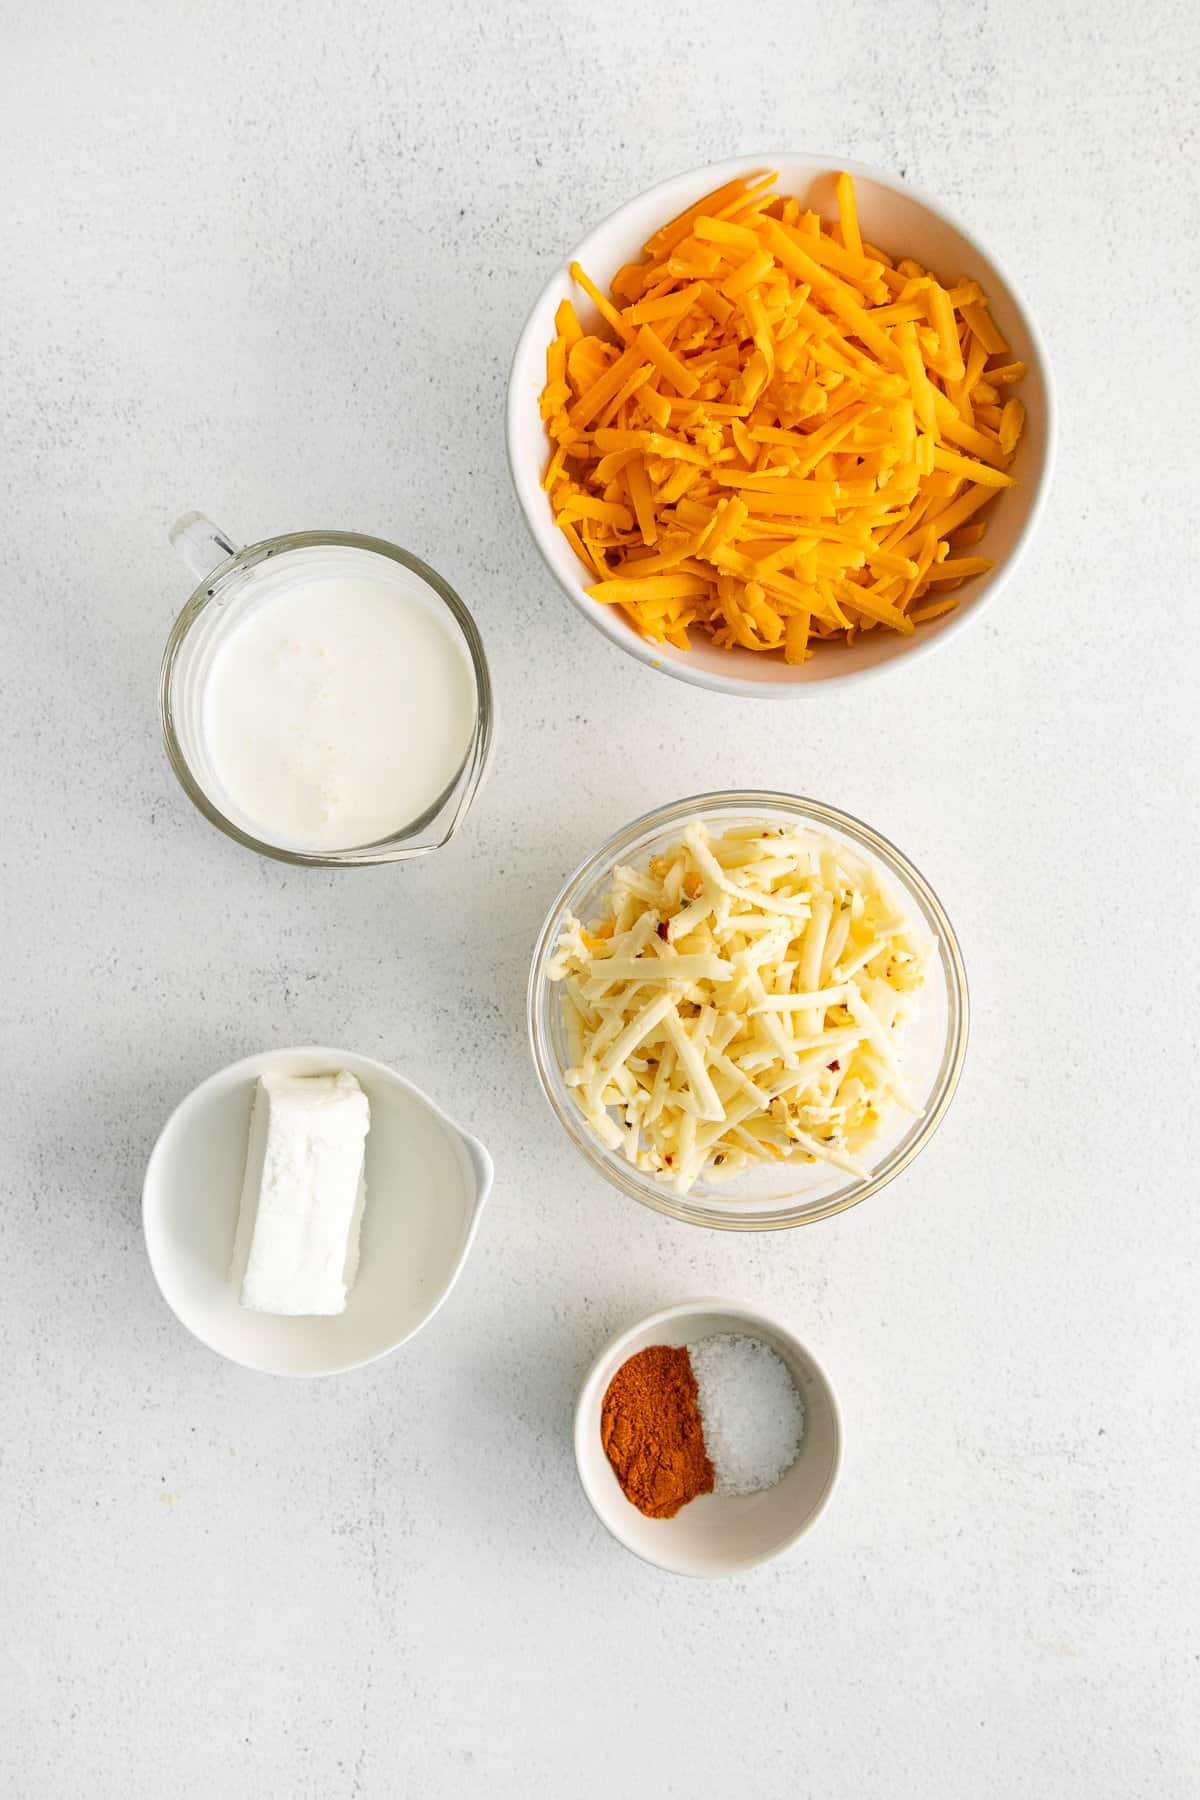 Ingredients for homemade cheese spread in bowls.